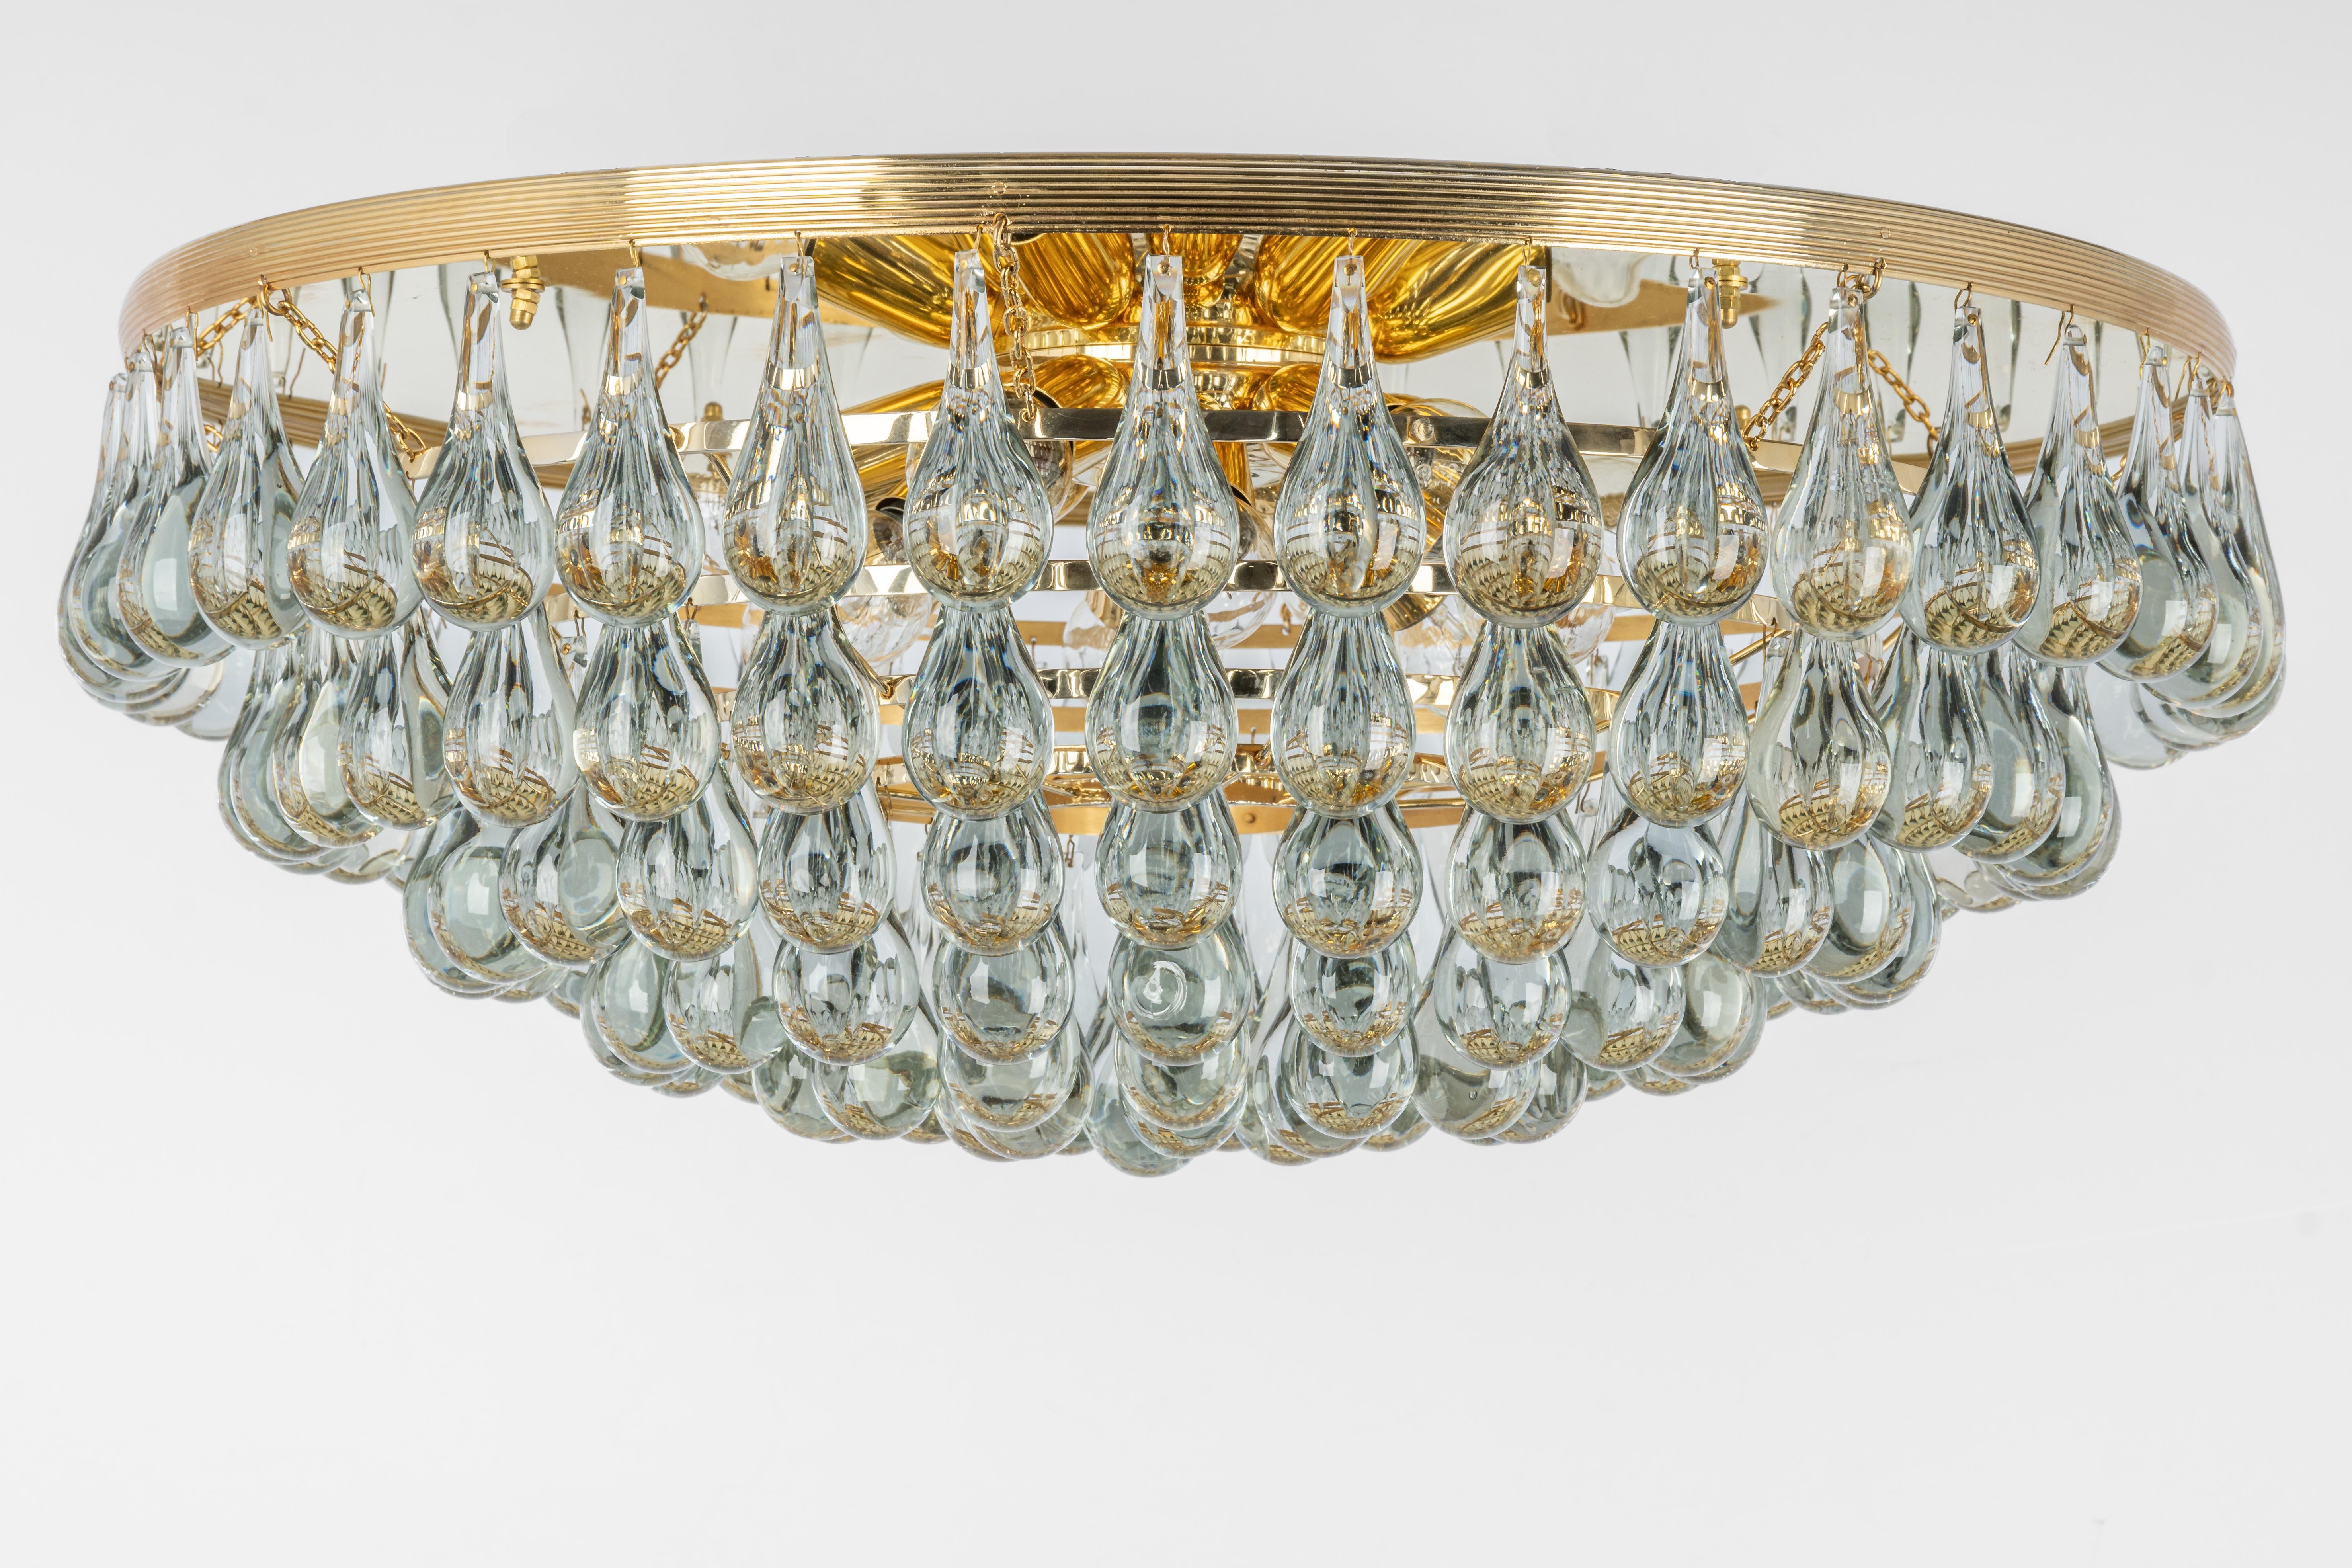 1 of 3 Large Murano Glass Tear Drop Chandelier by C.Palme, Germany, 1970s For Sale 4